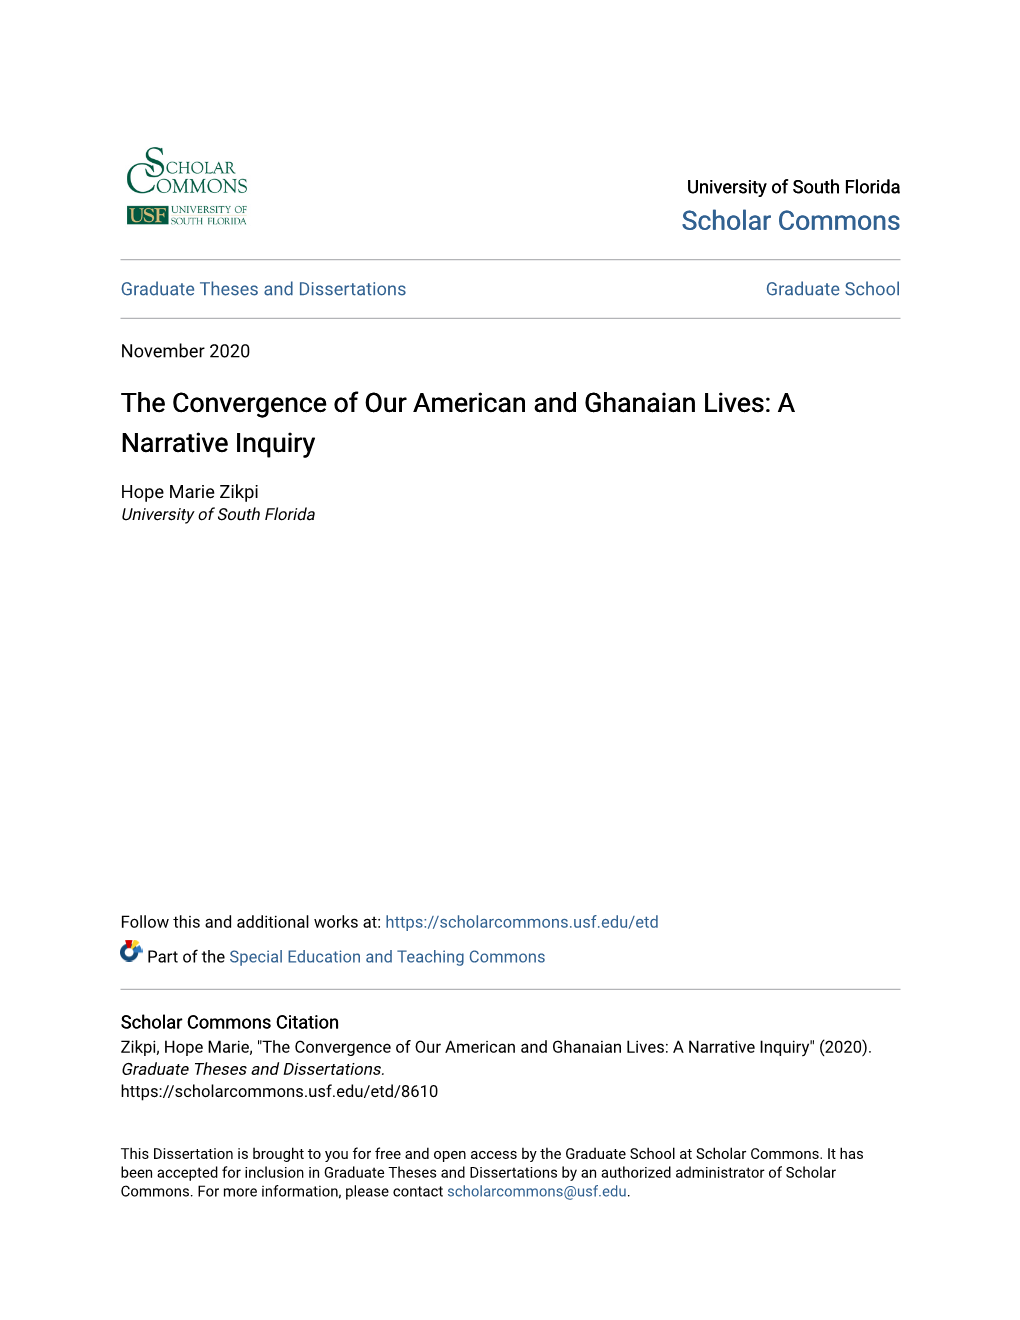 The Convergence of Our American and Ghanaian Lives: a Narrative Inquiry